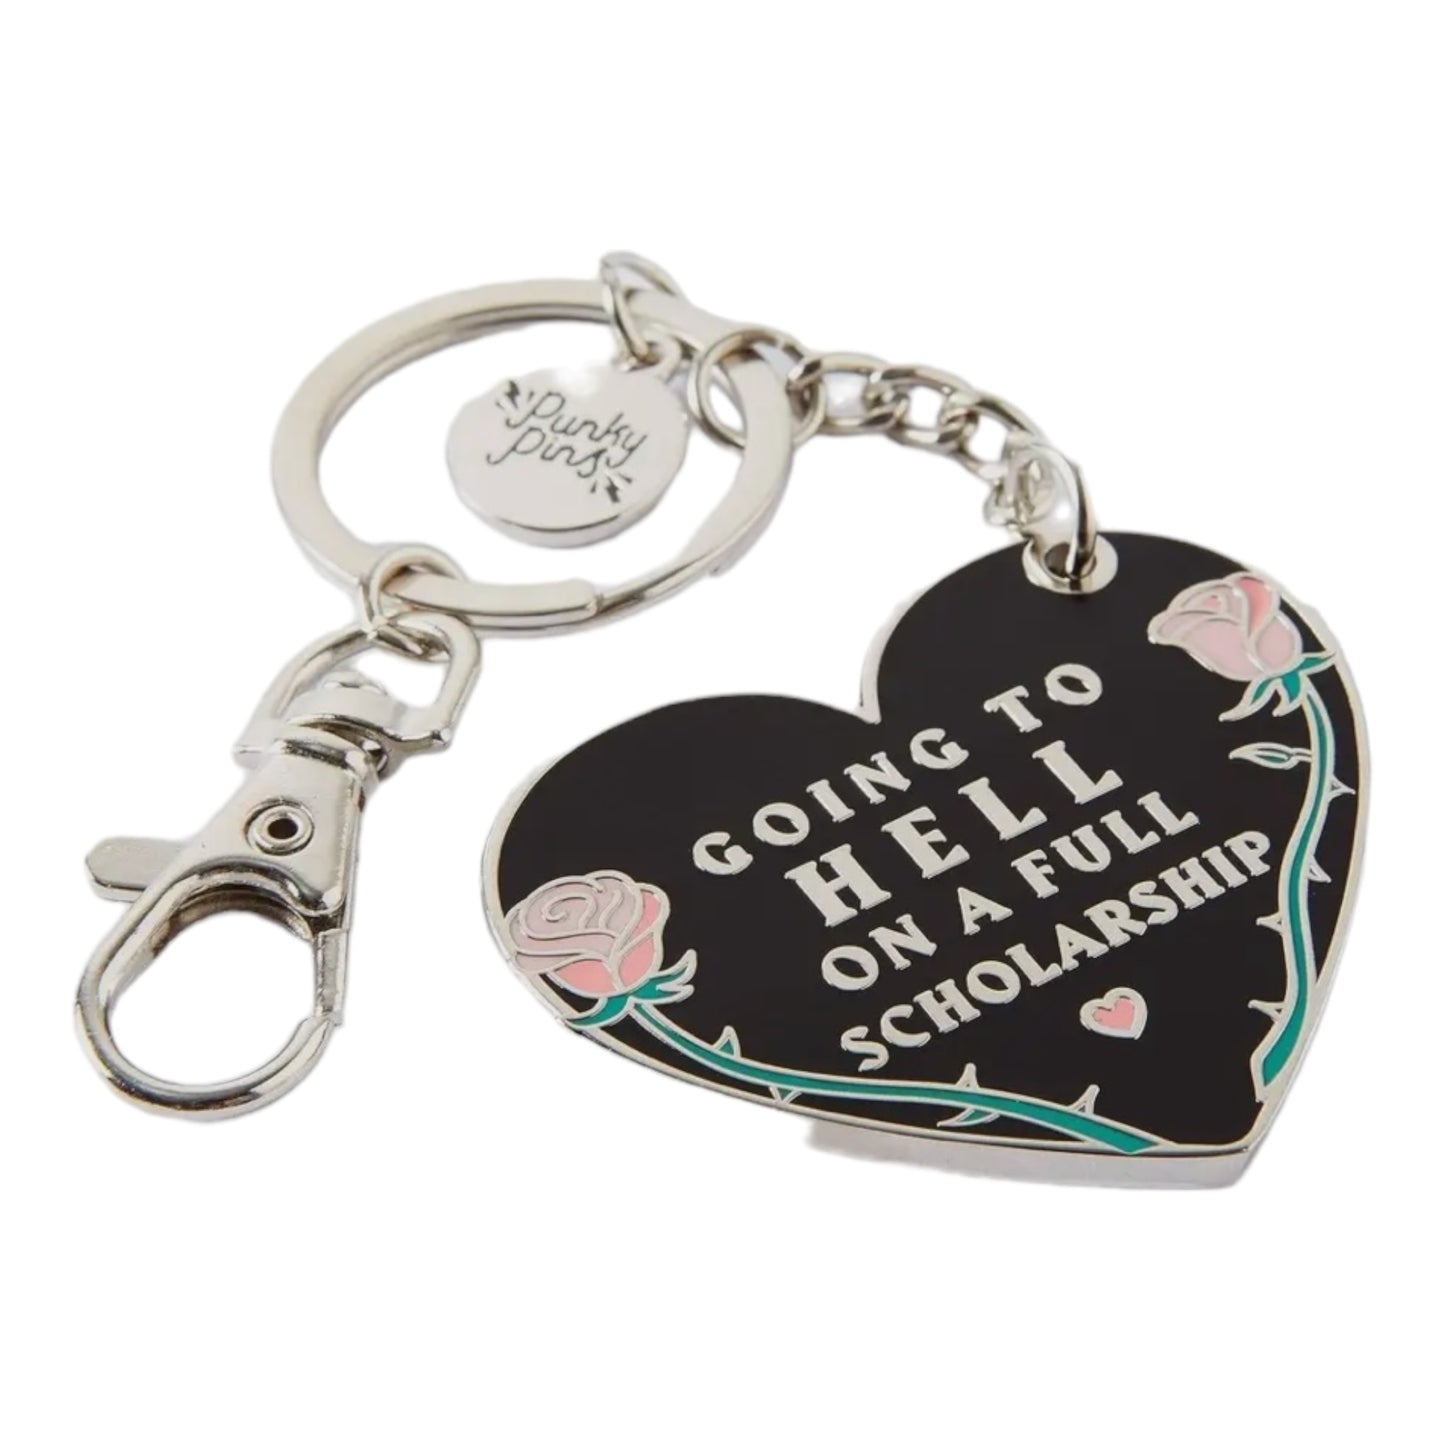 Going To Hell On A Full Scholarship Keychain